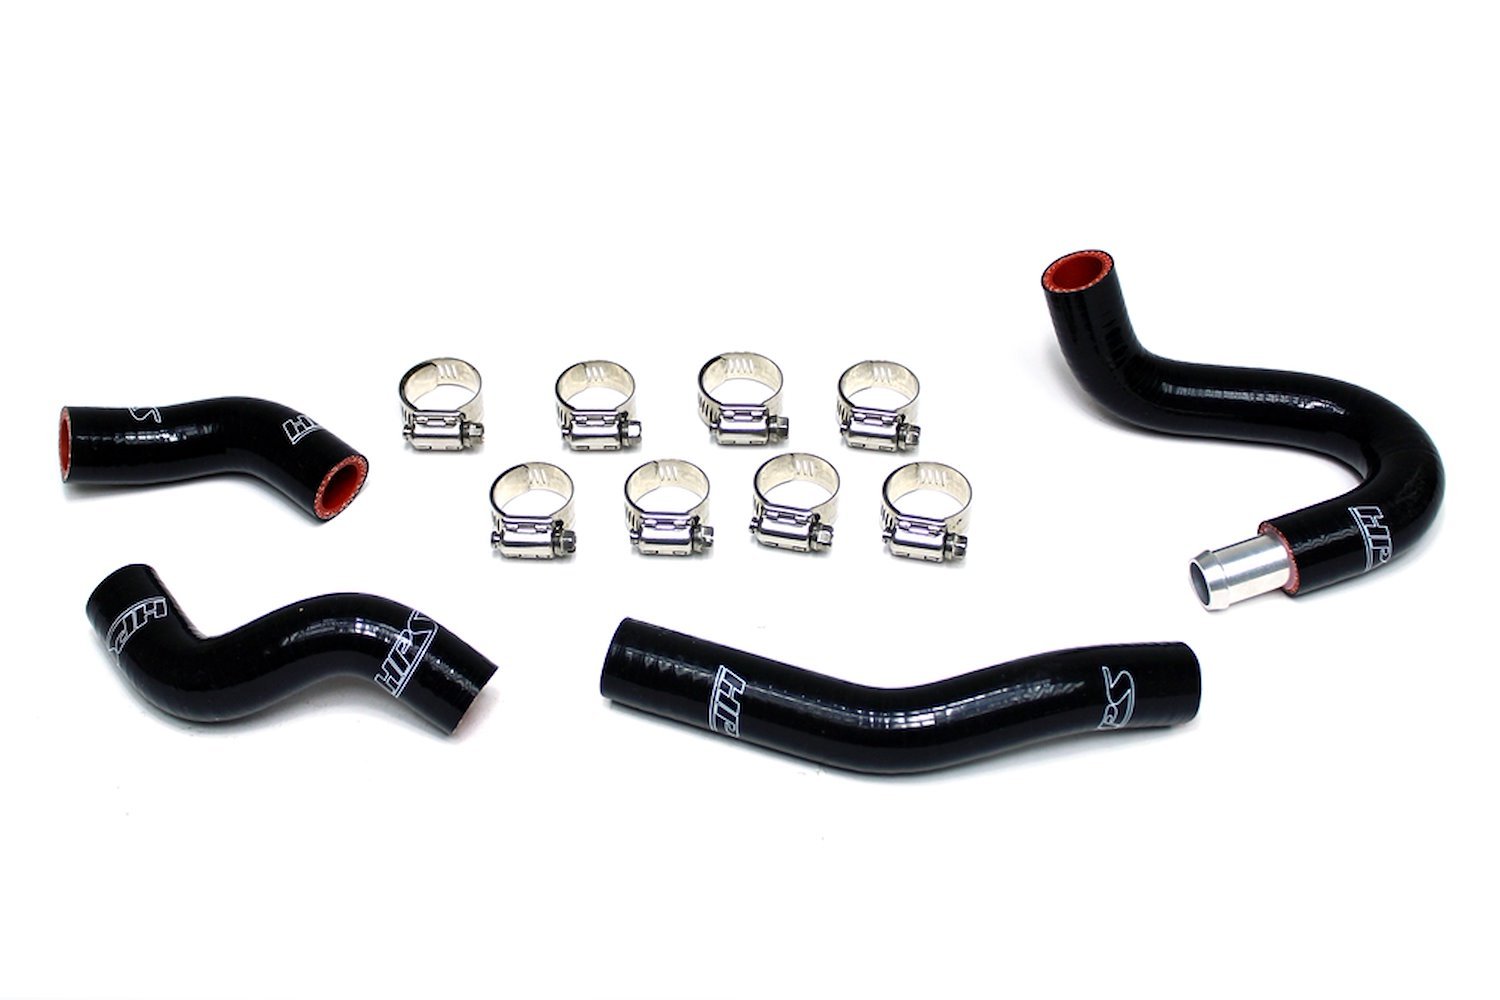 57-1436-BLUE Heater Hose Kit, High-Temp 3-Ply Reinforced Silicone, Replace OEM Rubber Heater Coolant Hoses